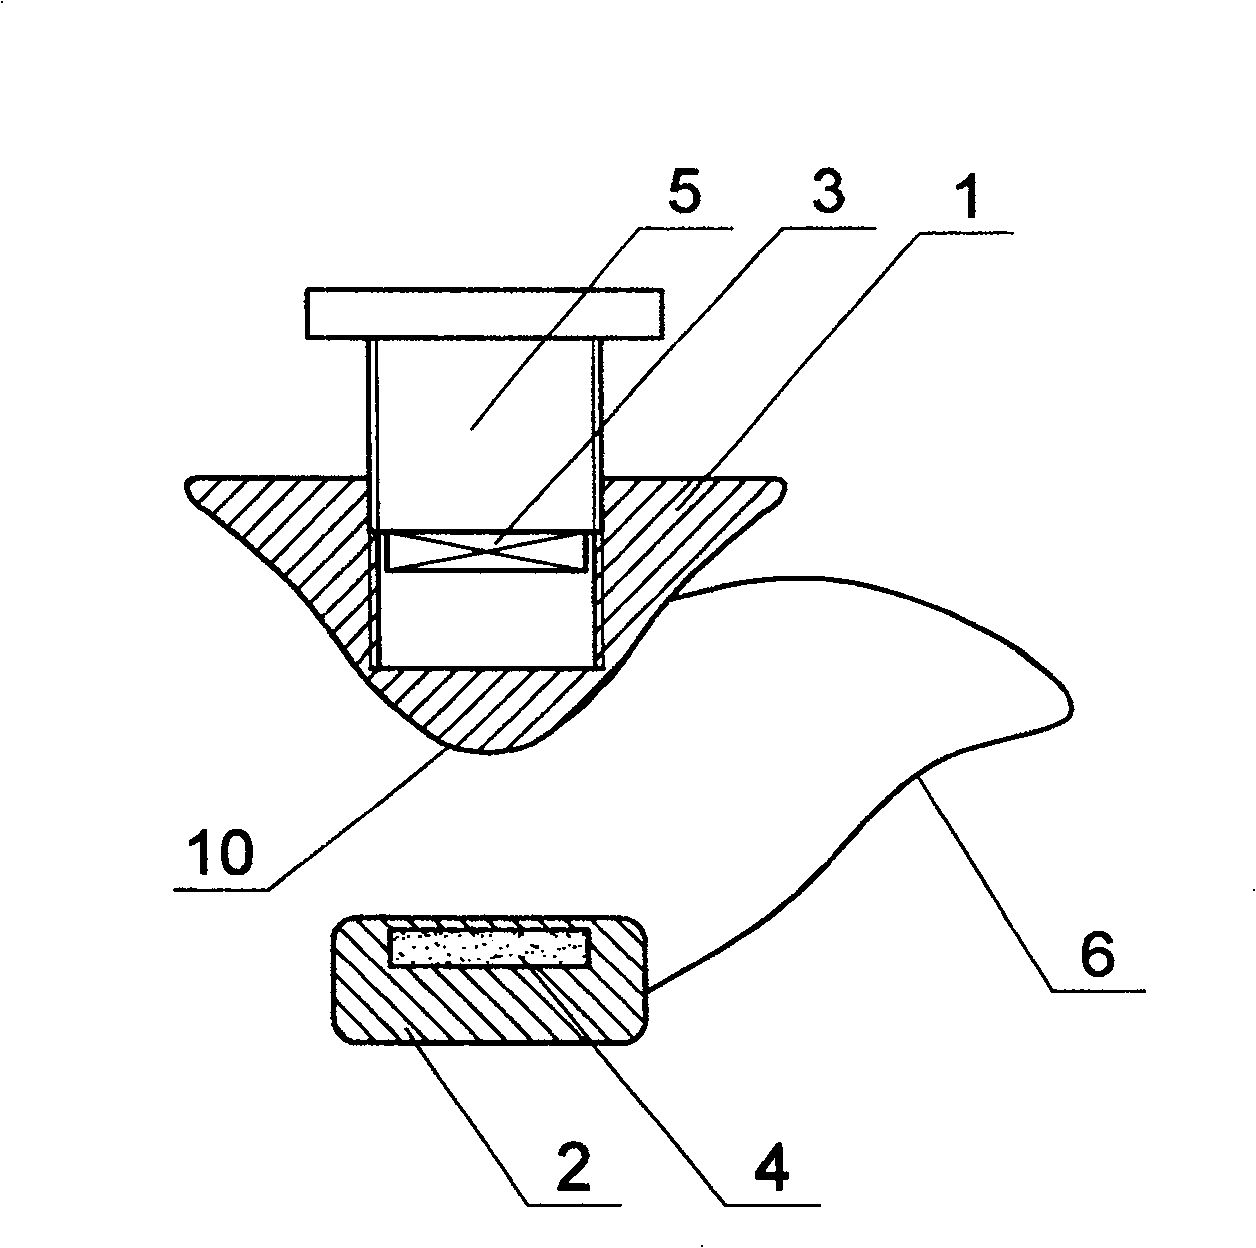 Dimple forming device